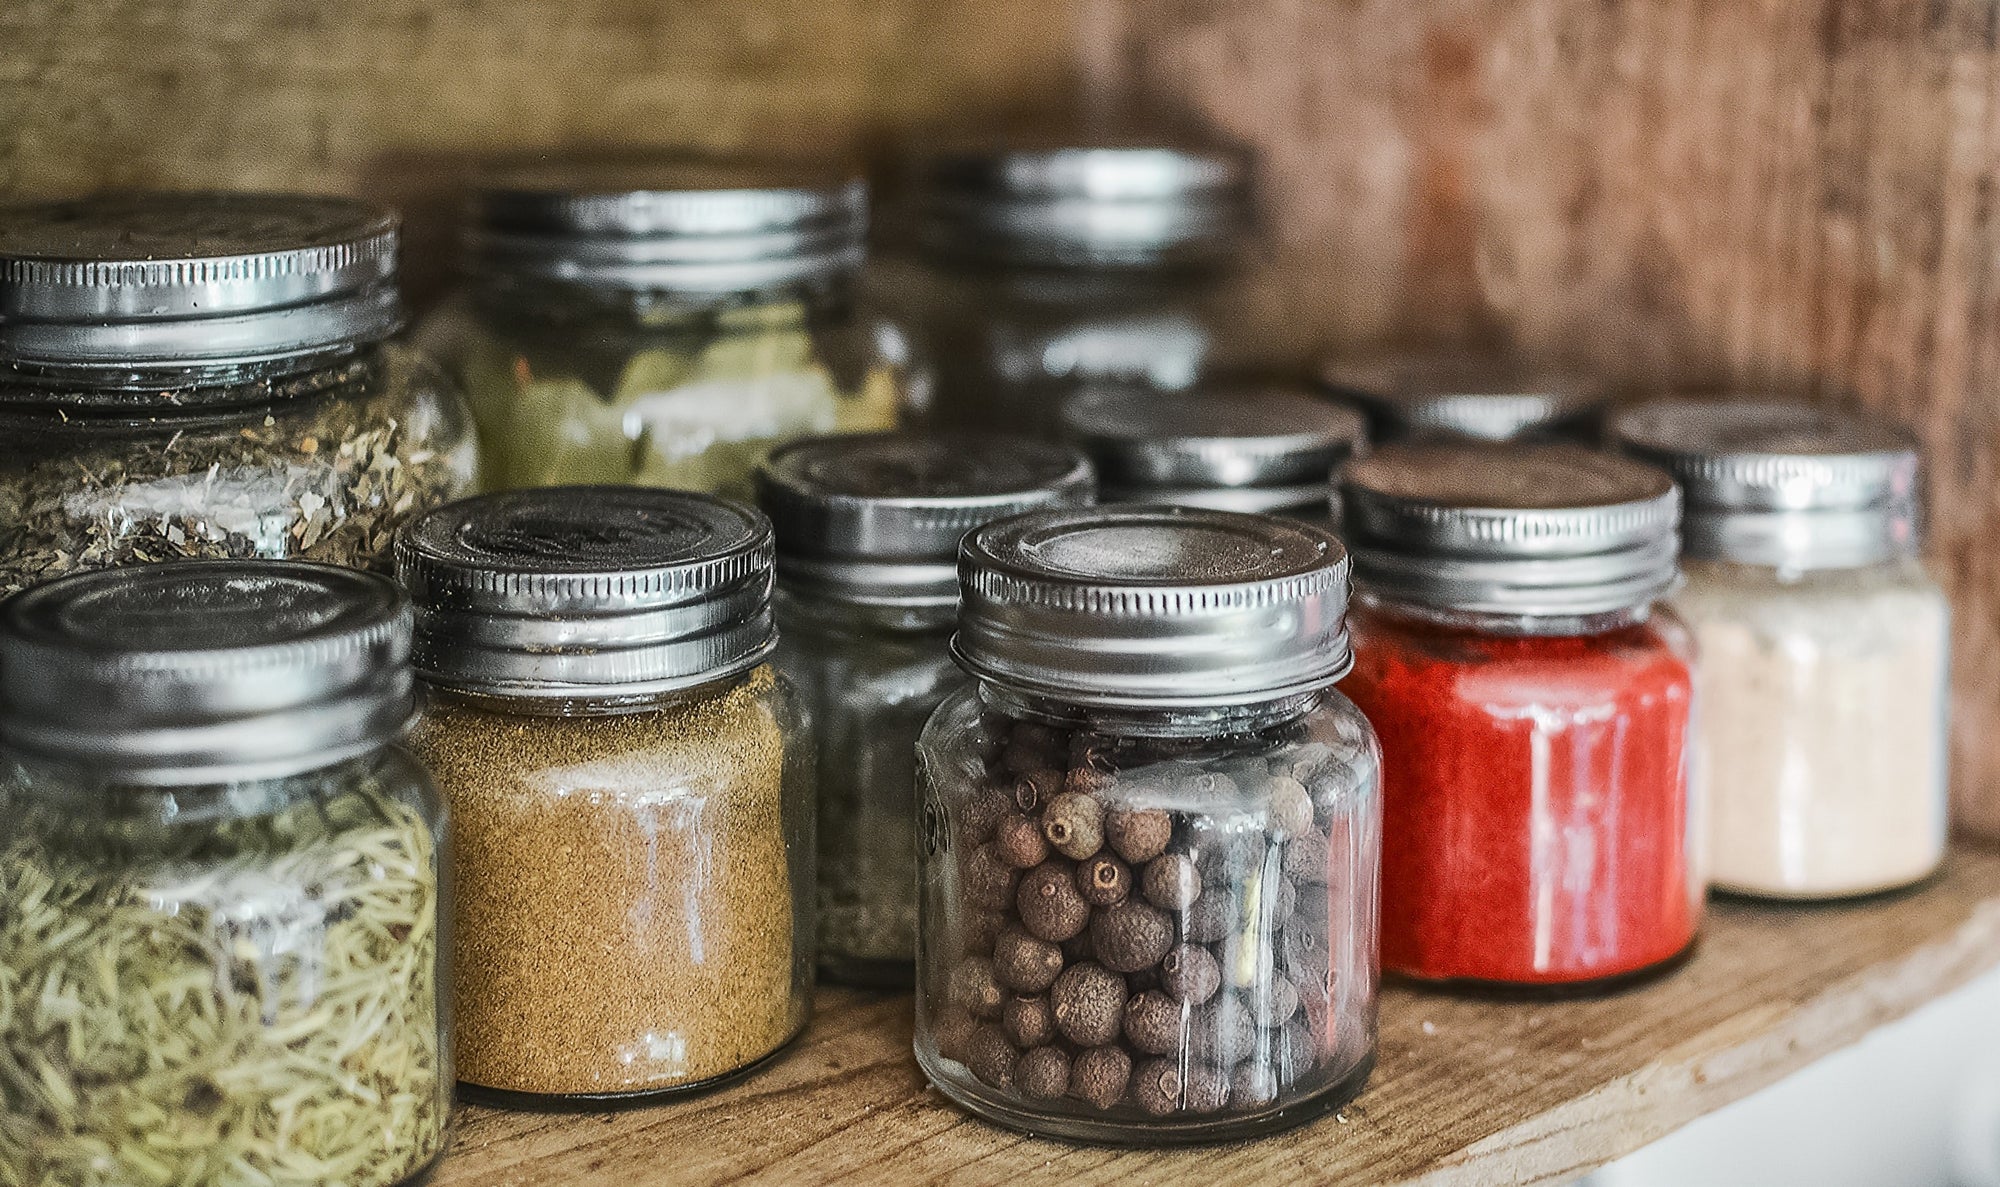 Is Preserving Food a Lost Art in an Age Where Convenience Often Trumps Sustainability?